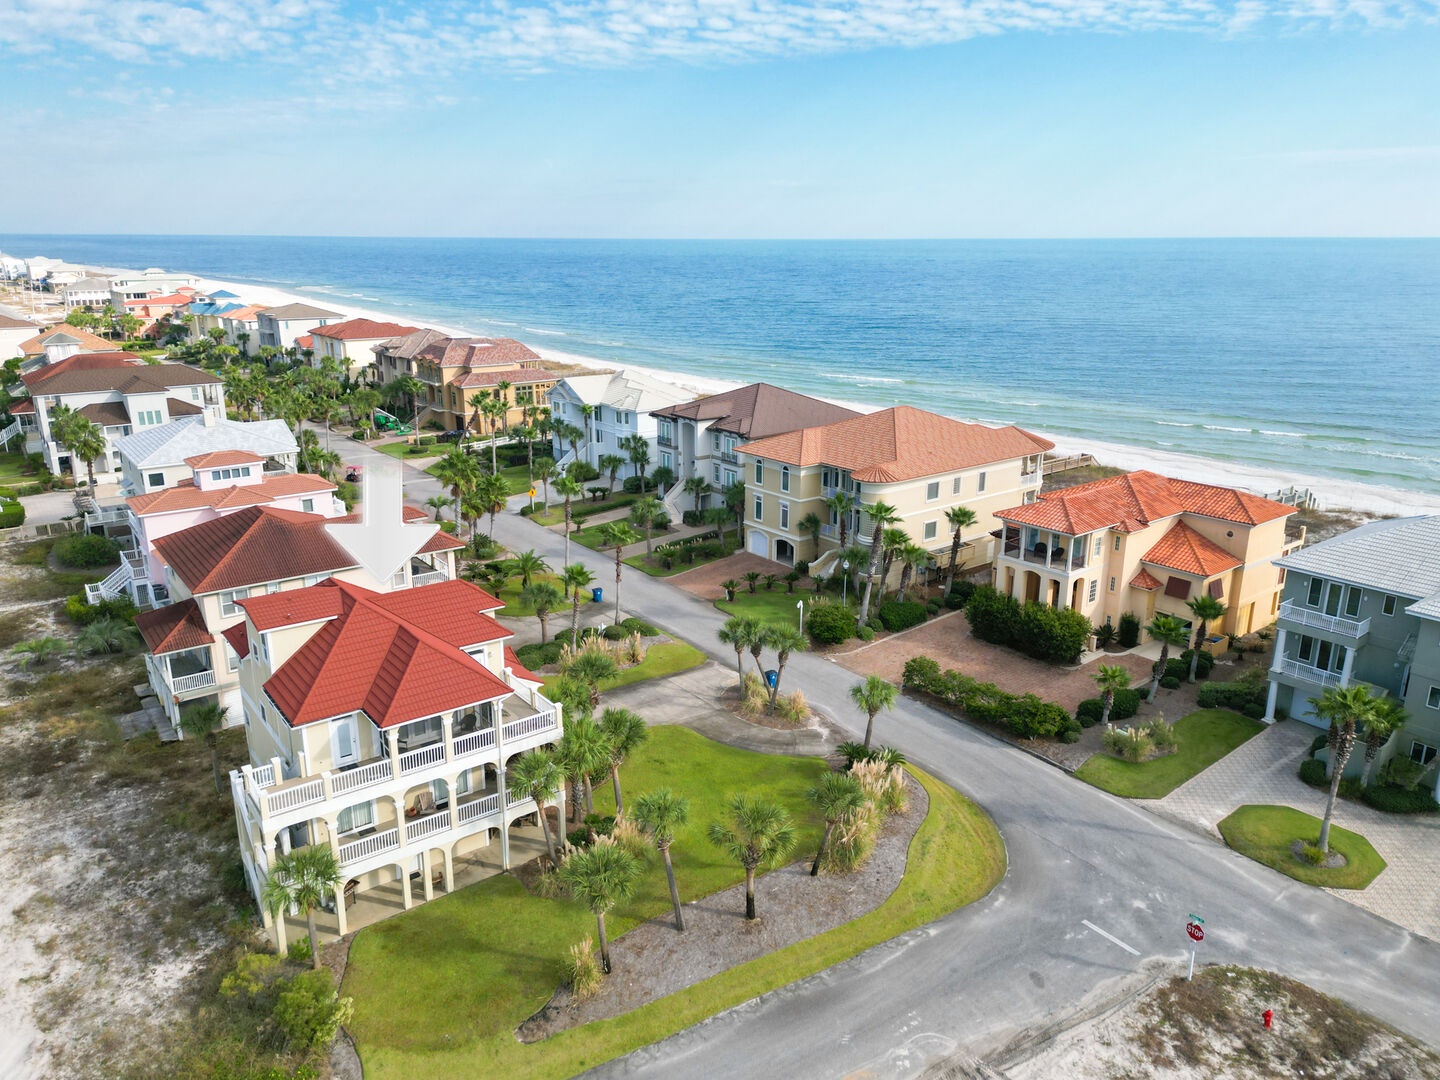 Enjoy the quiet gated community and private beach